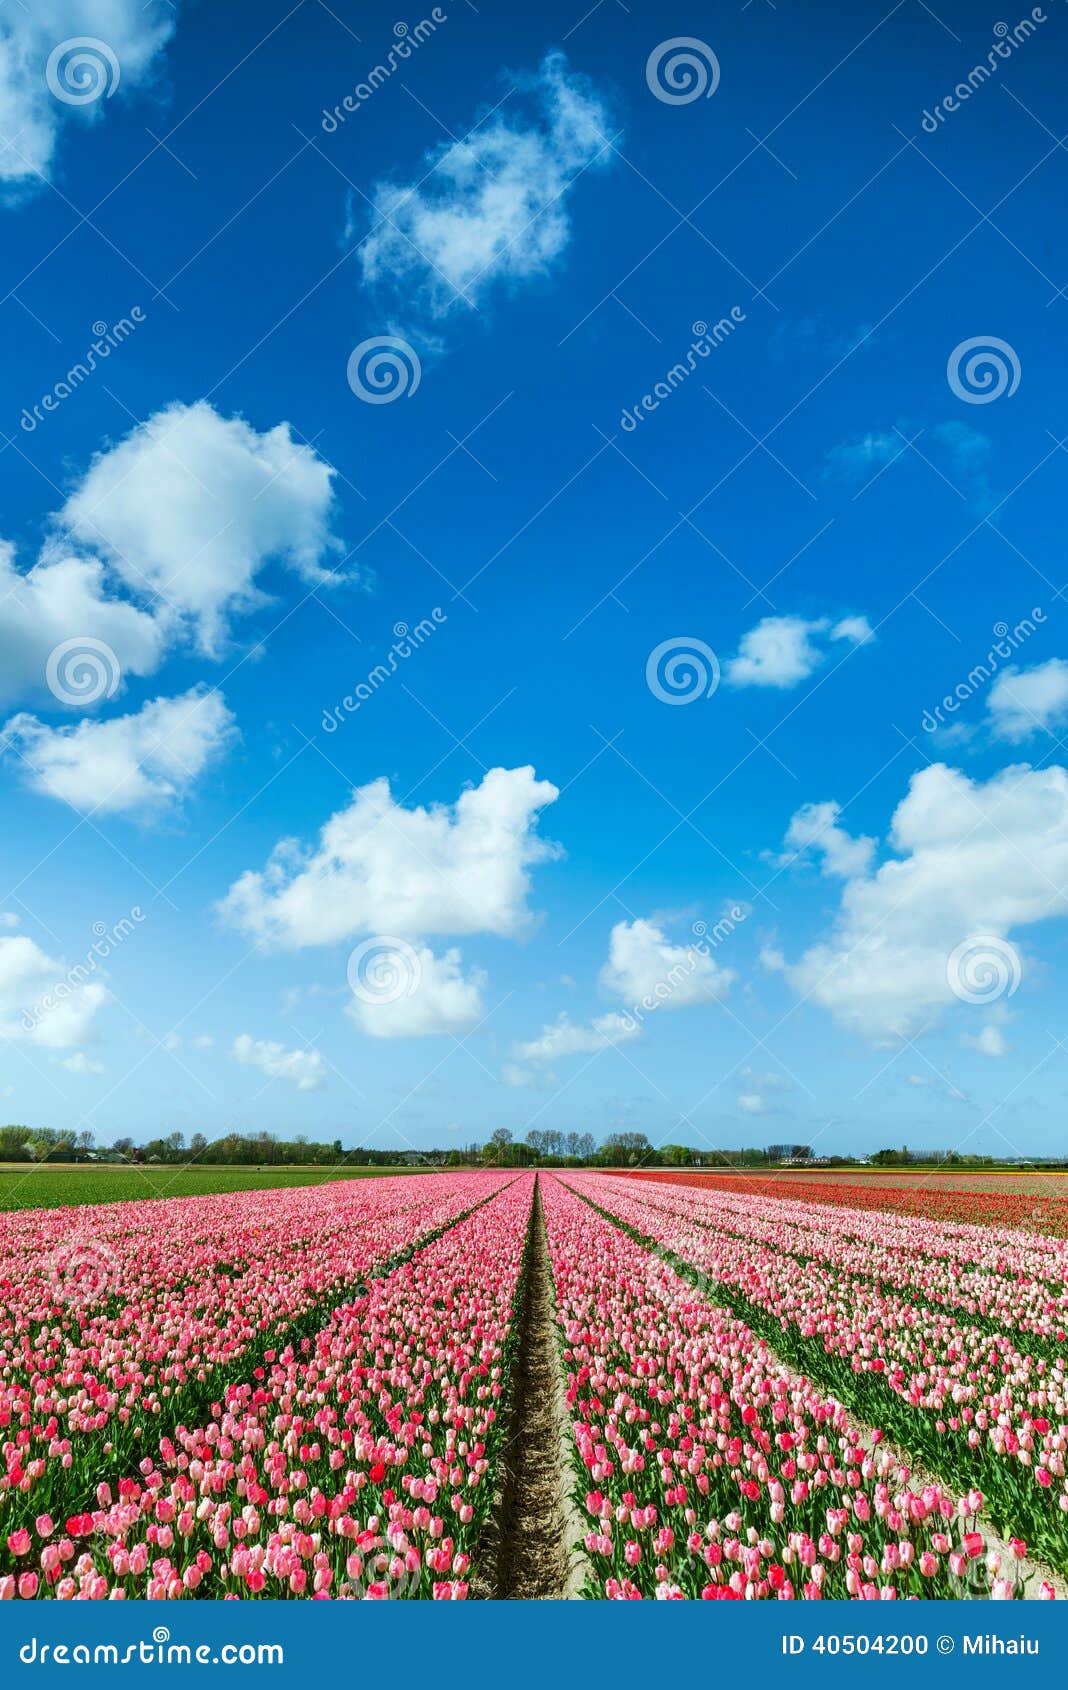 Pink Tulips Field stock photo. Image of dutch, bright - 40504200